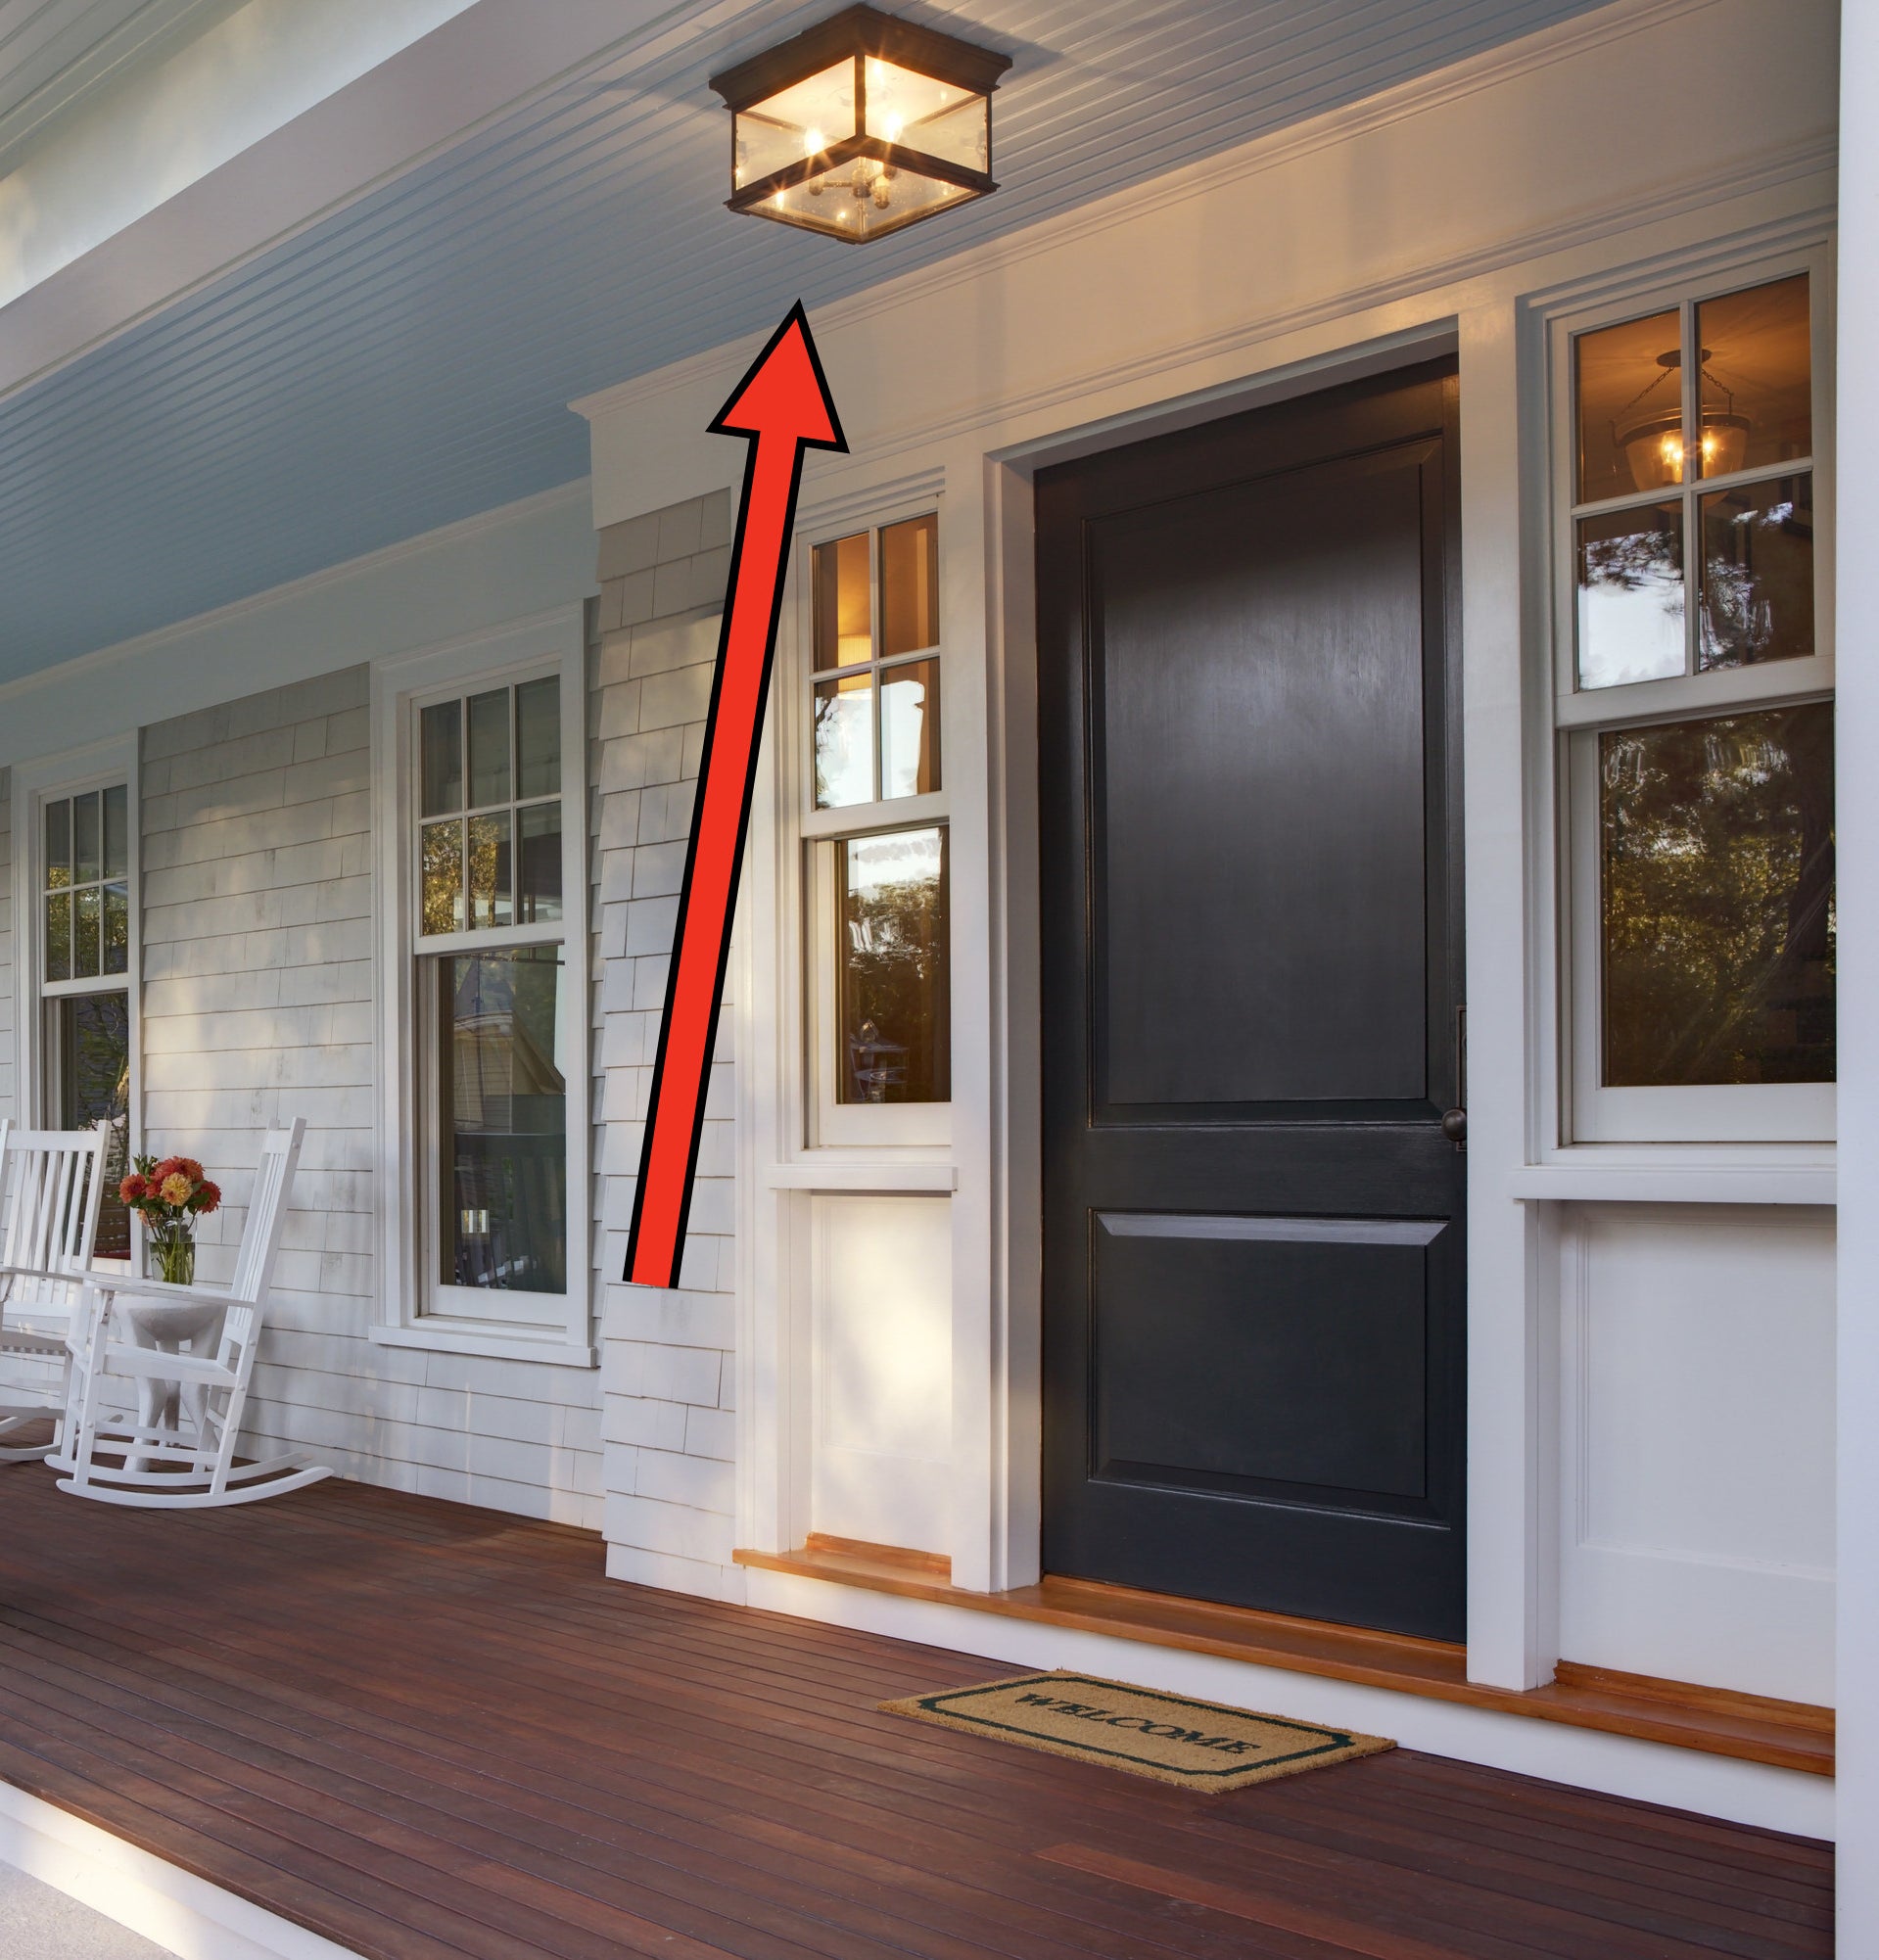 arrow pointing to lightbulbs in an outdoor light casing on a front porch